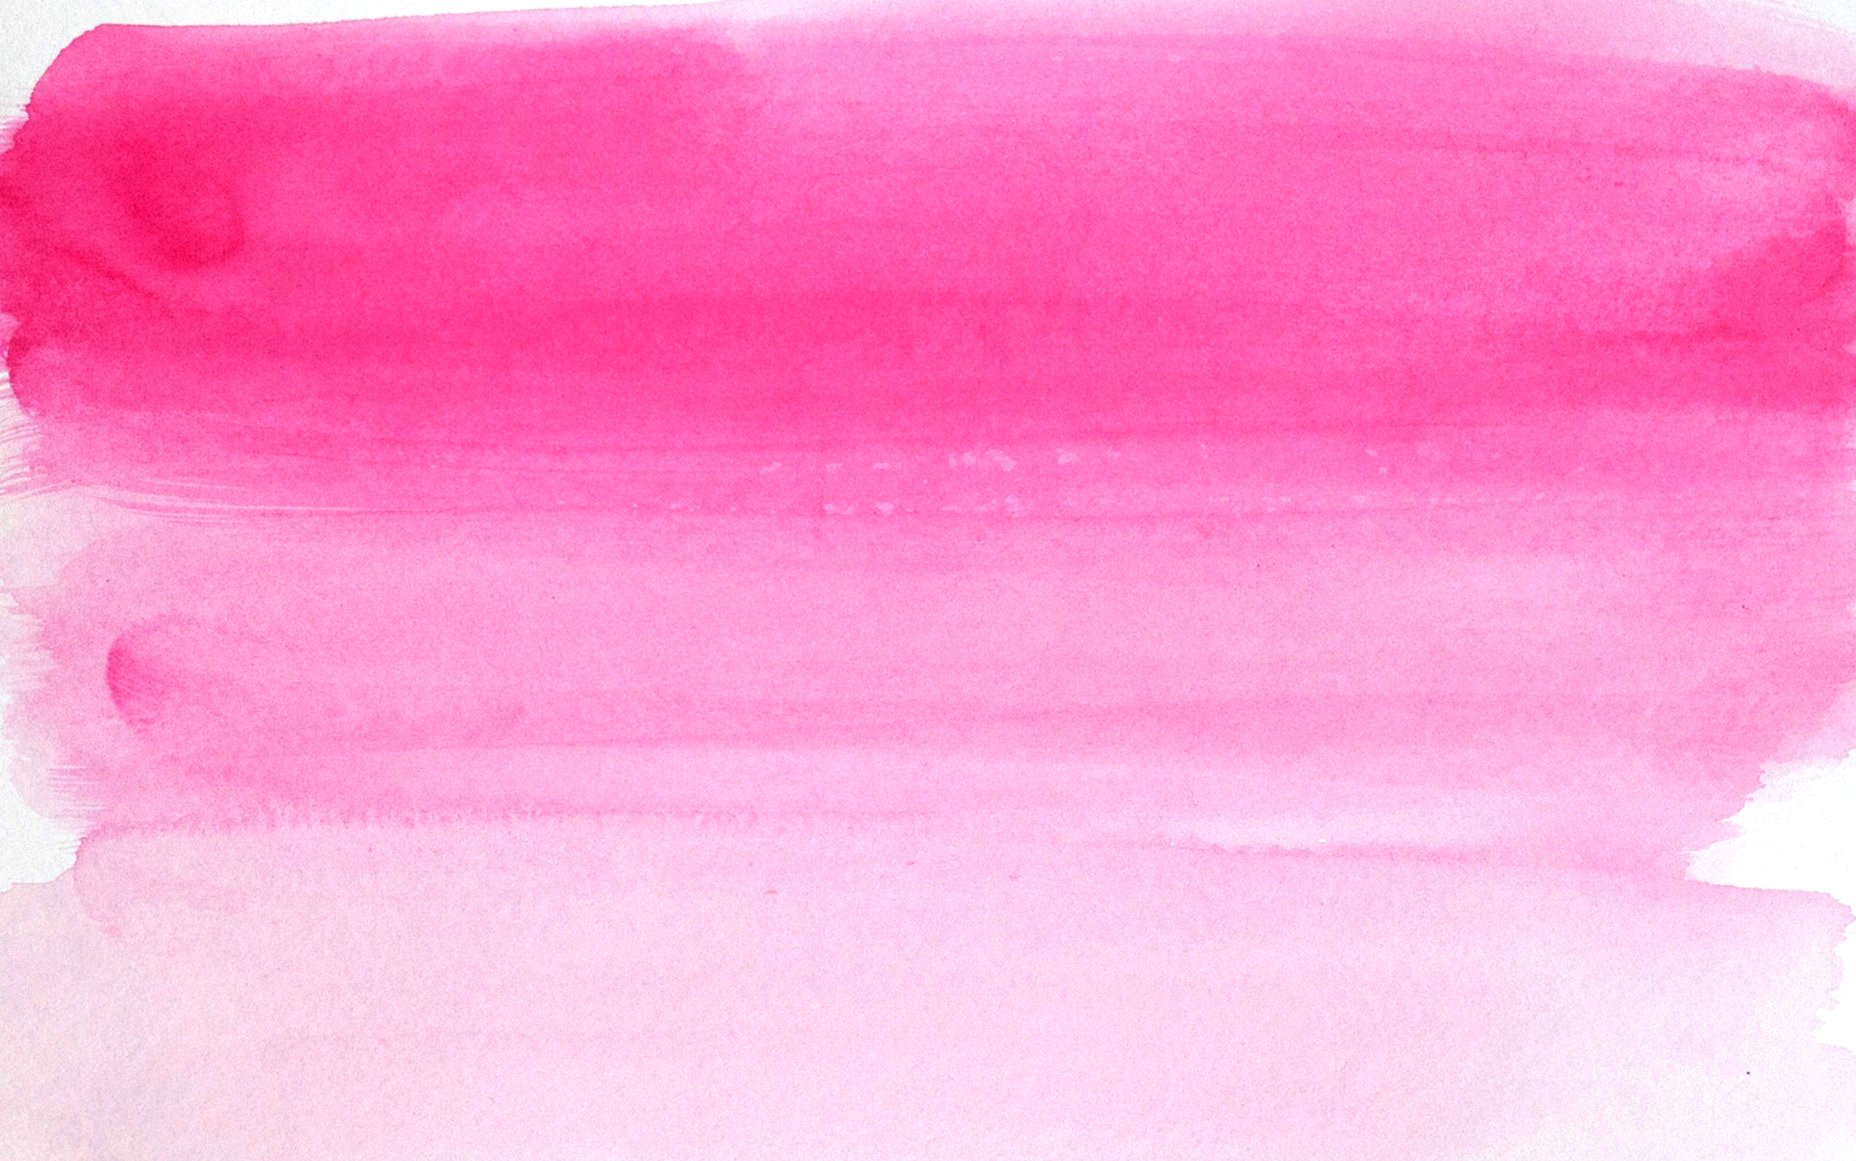 Pink Watercolor I Used To Make The Design